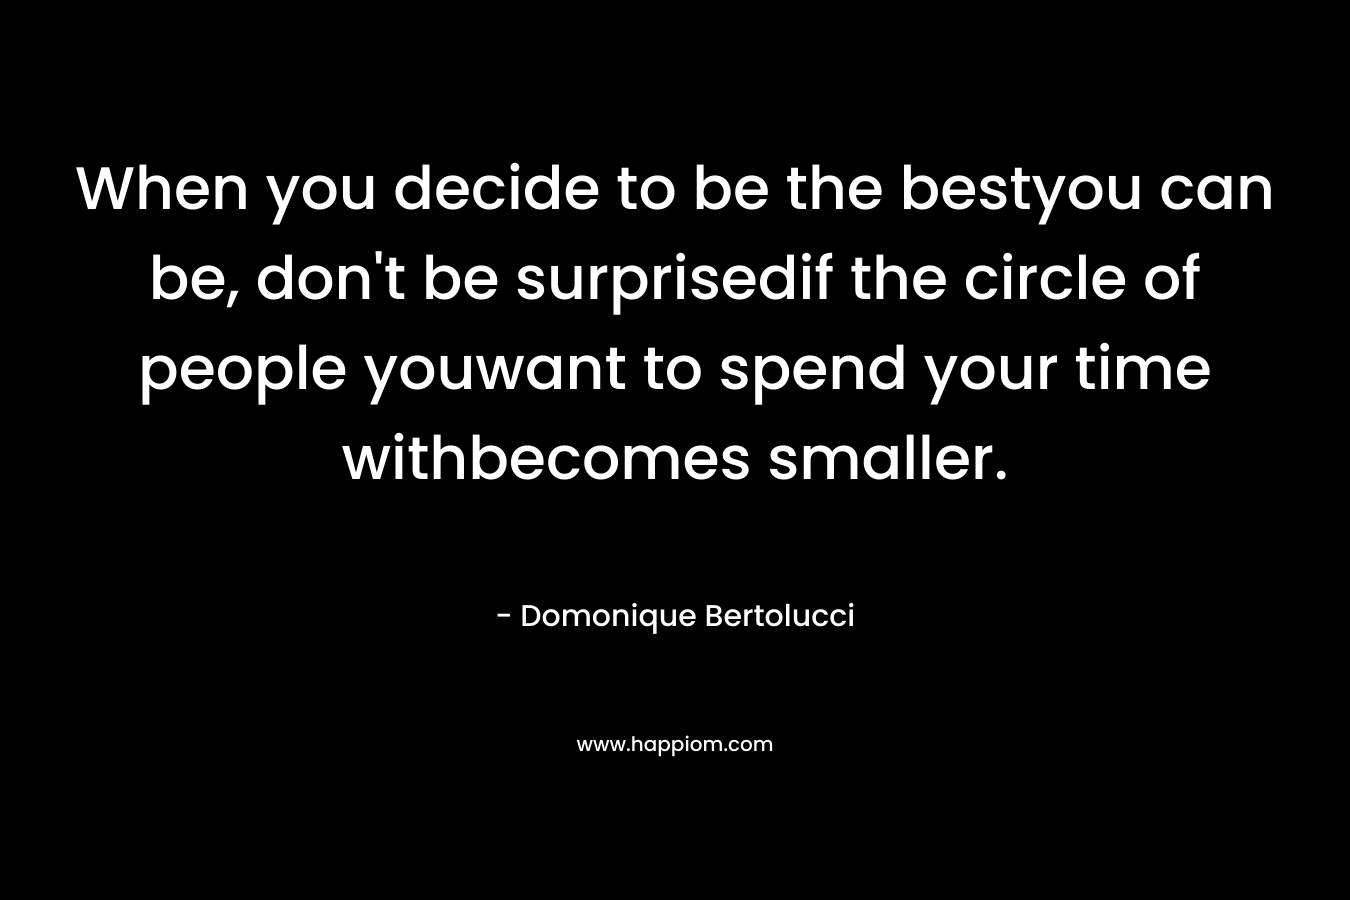 When you decide to be the bestyou can be, don't be surprisedif the circle of people youwant to spend your time withbecomes smaller.